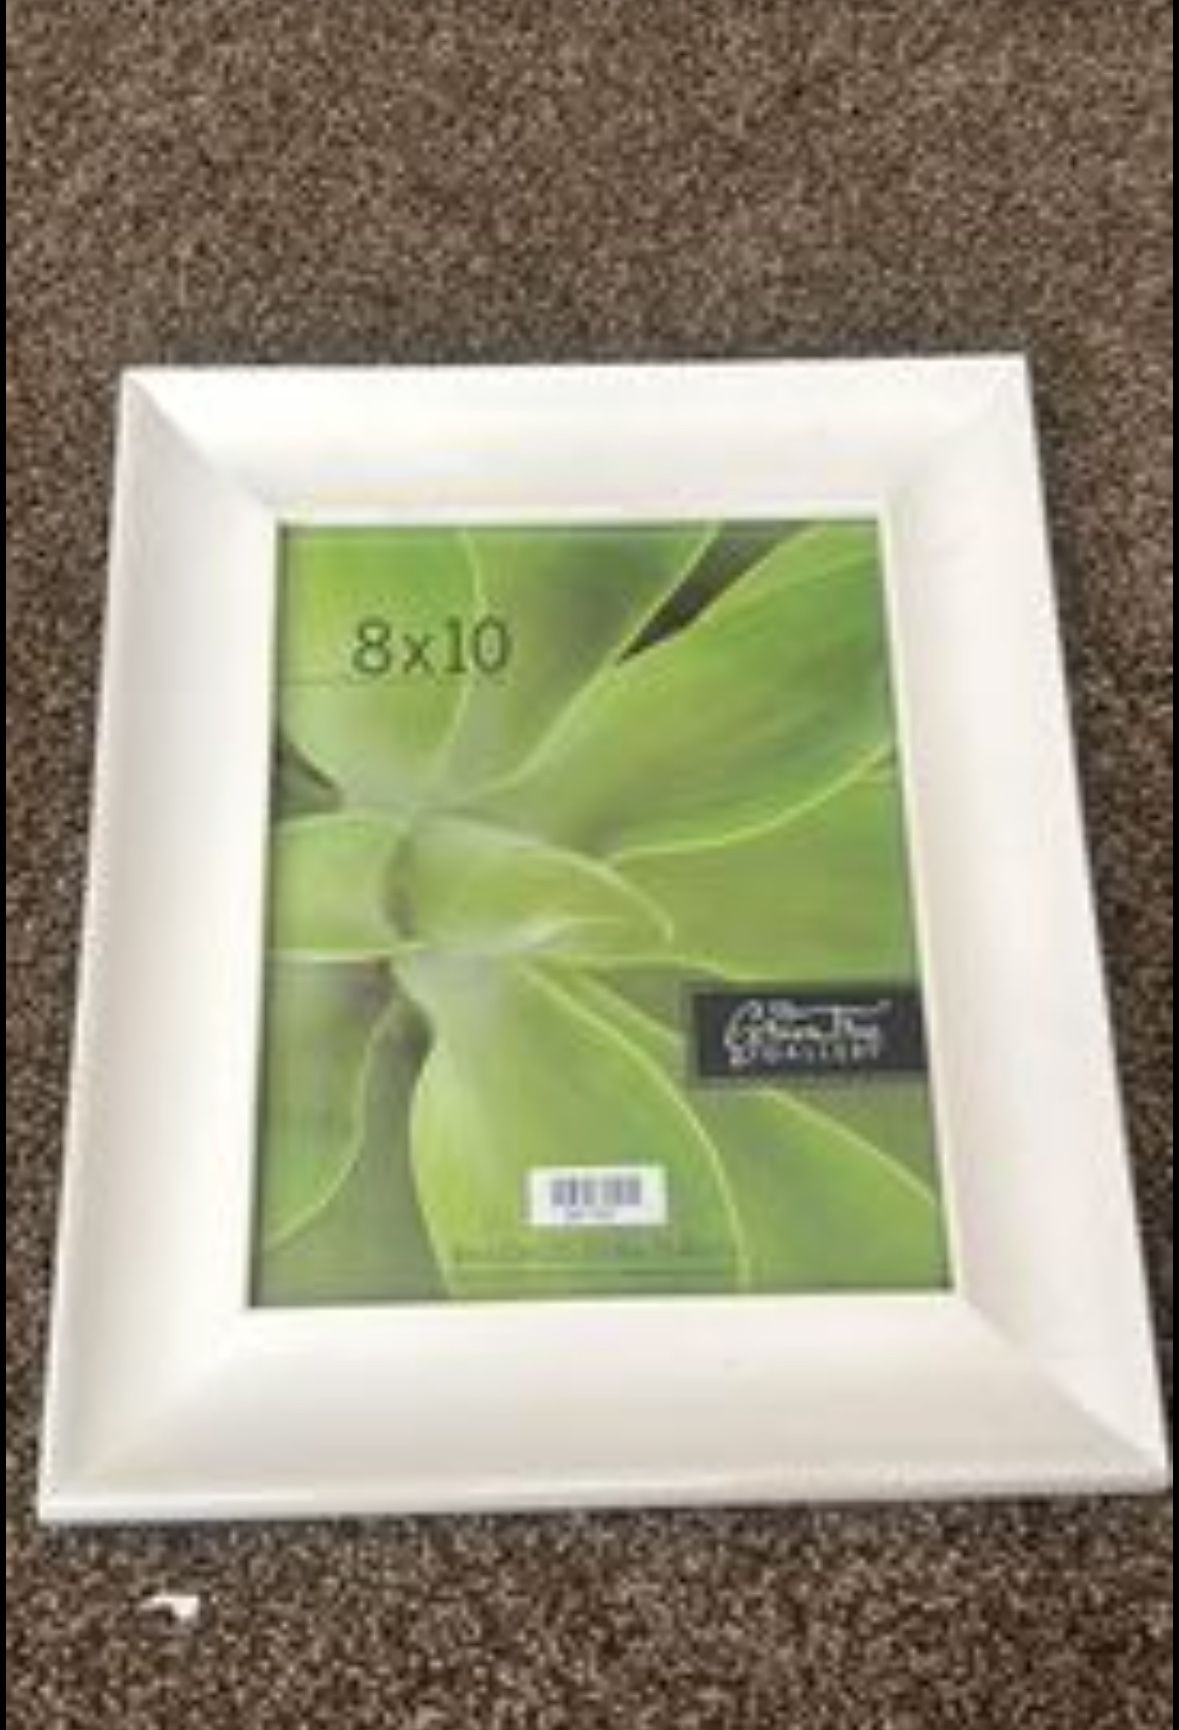 White Picture Frame 